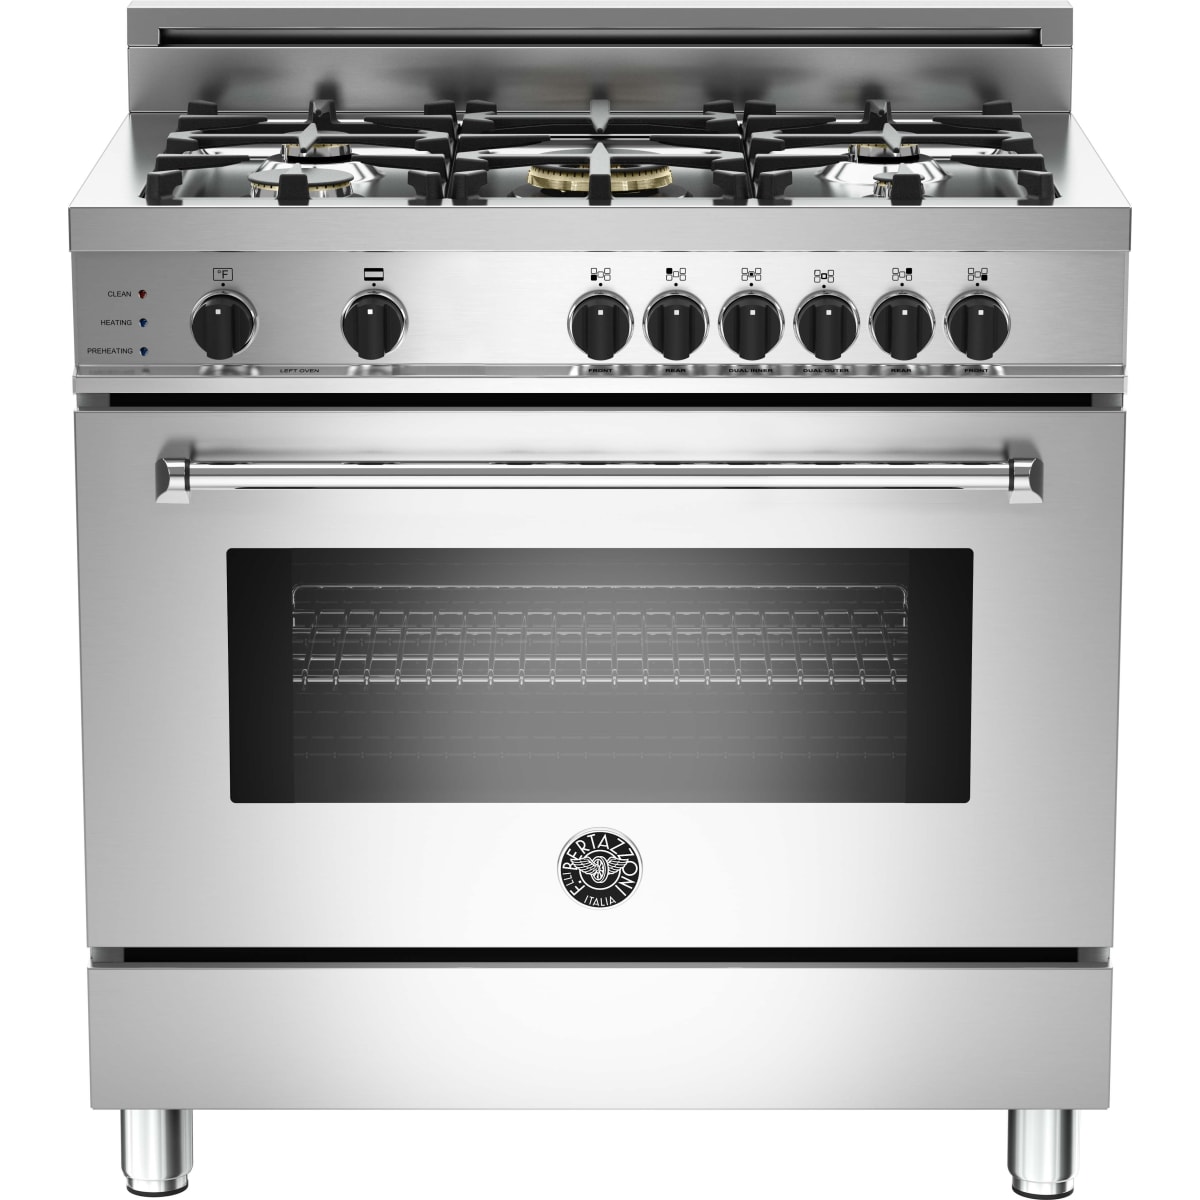 MAST486GRTBXT by Bertazzoni - 48 Gas Rangetop 6 brass burners + electric  griddle Stainless Steel